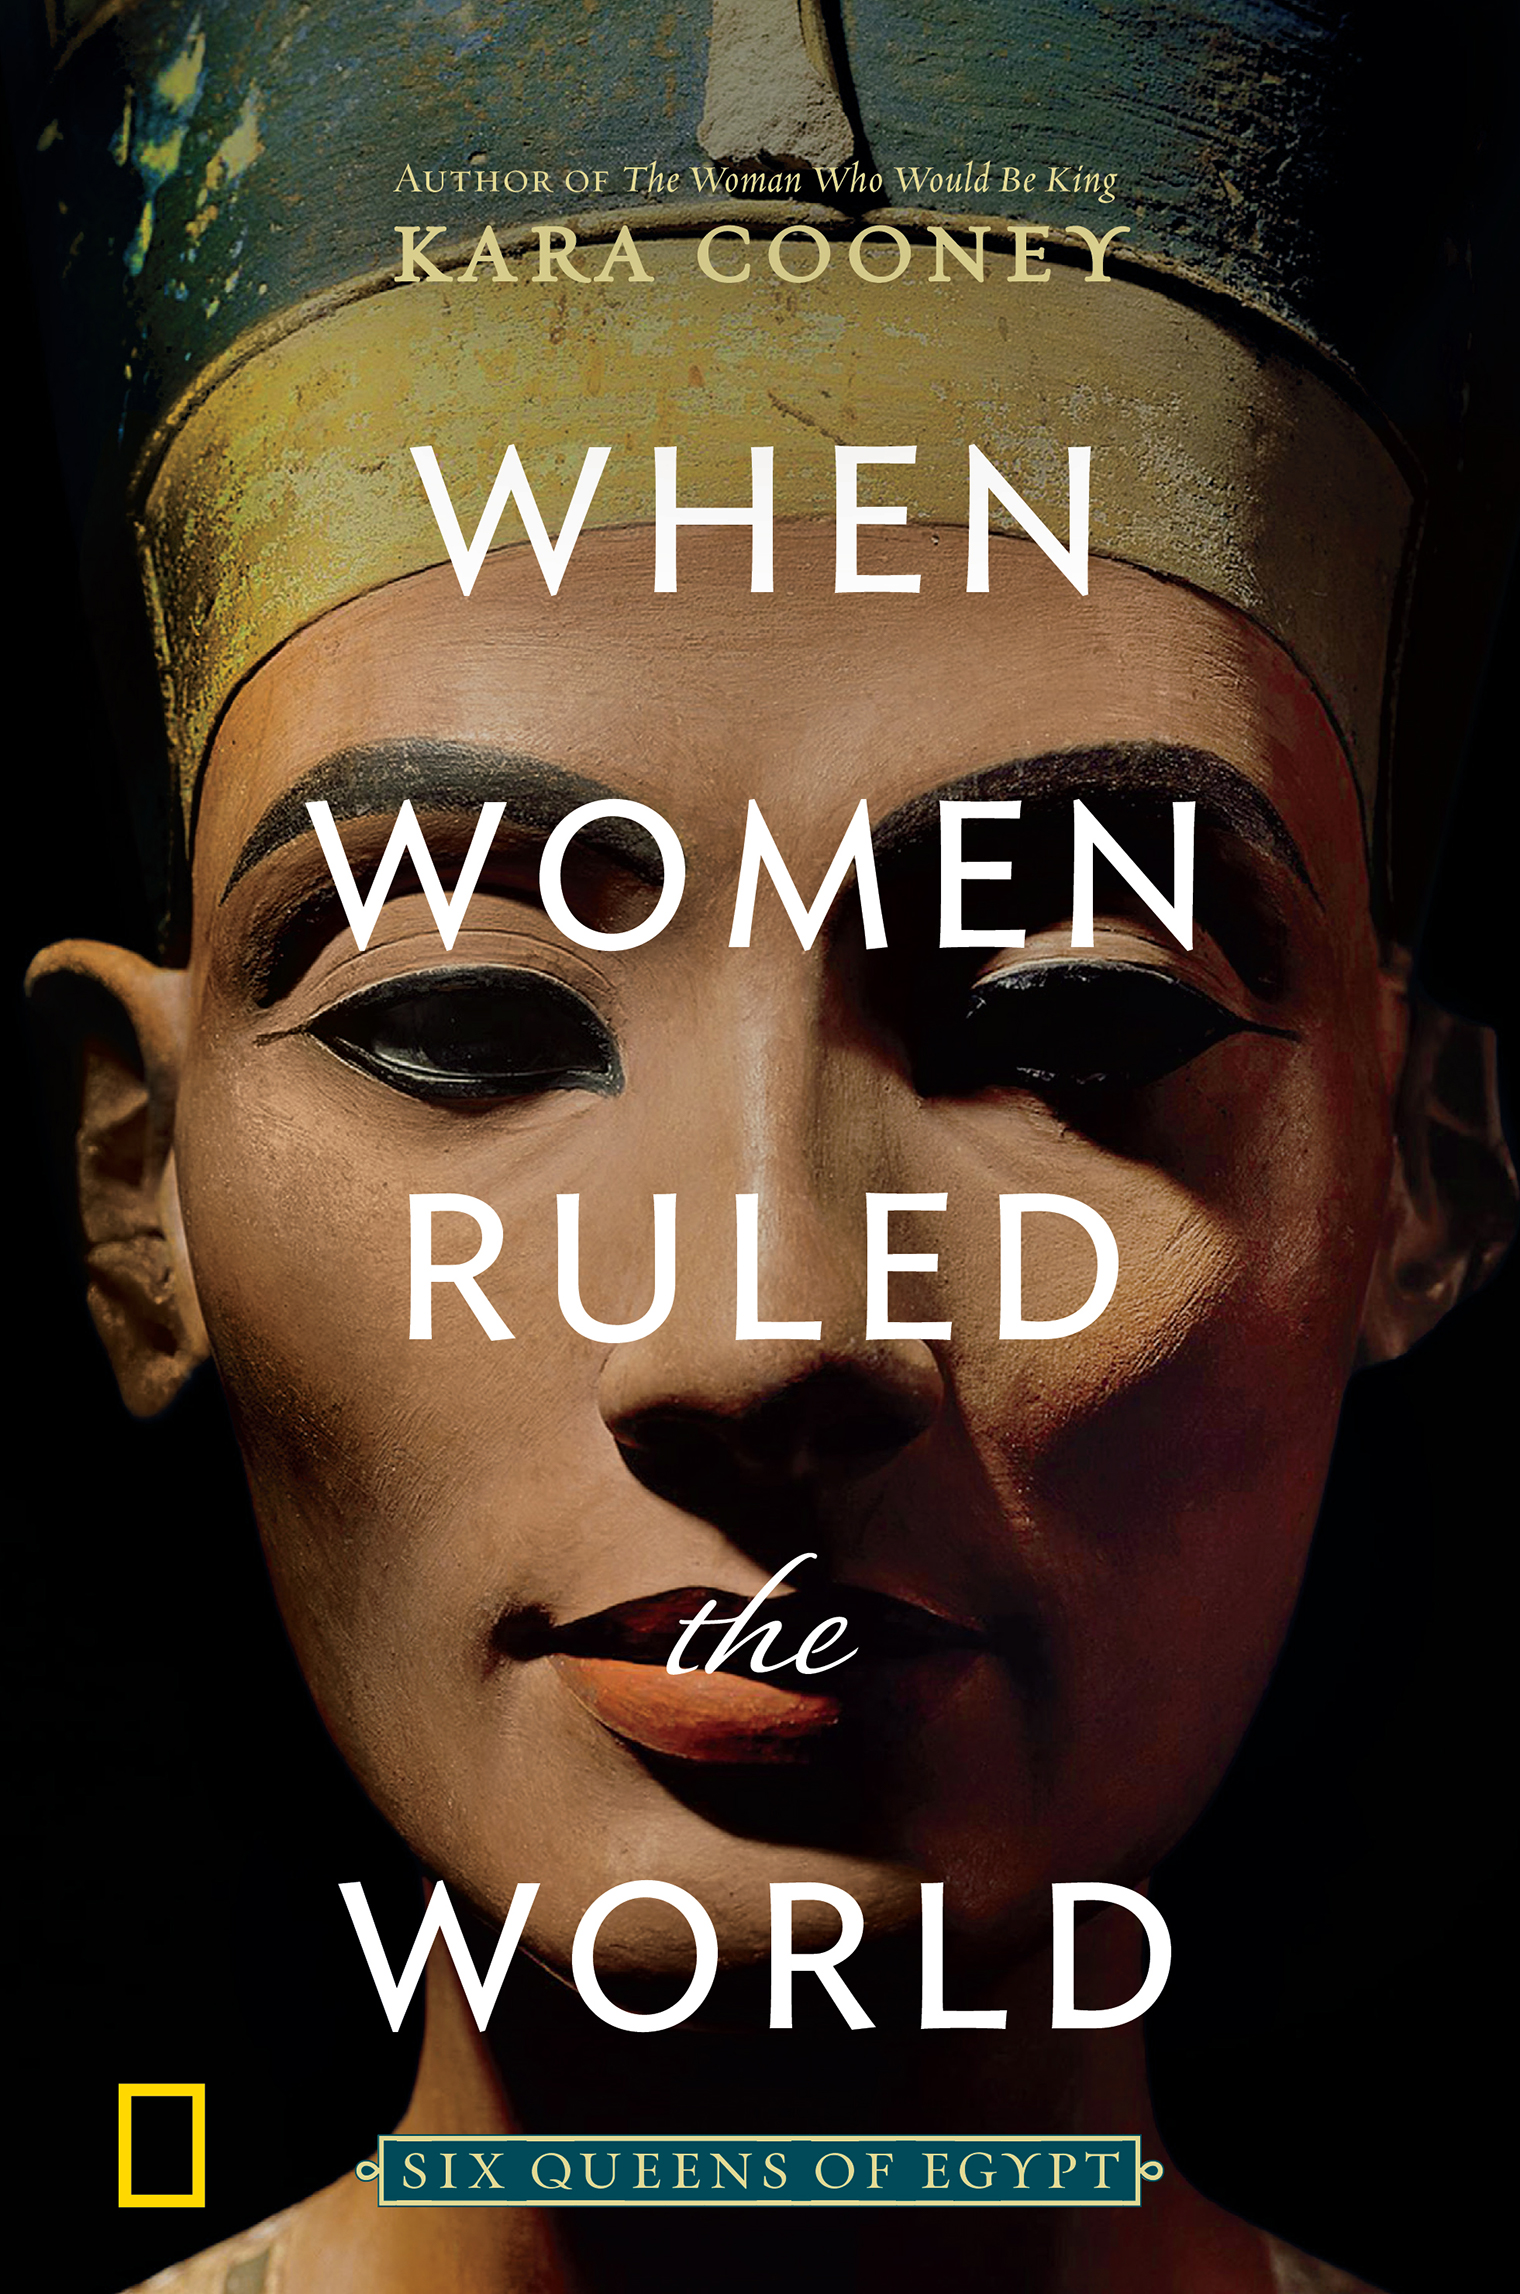 When women ruled the world six queens of Egypt cover image